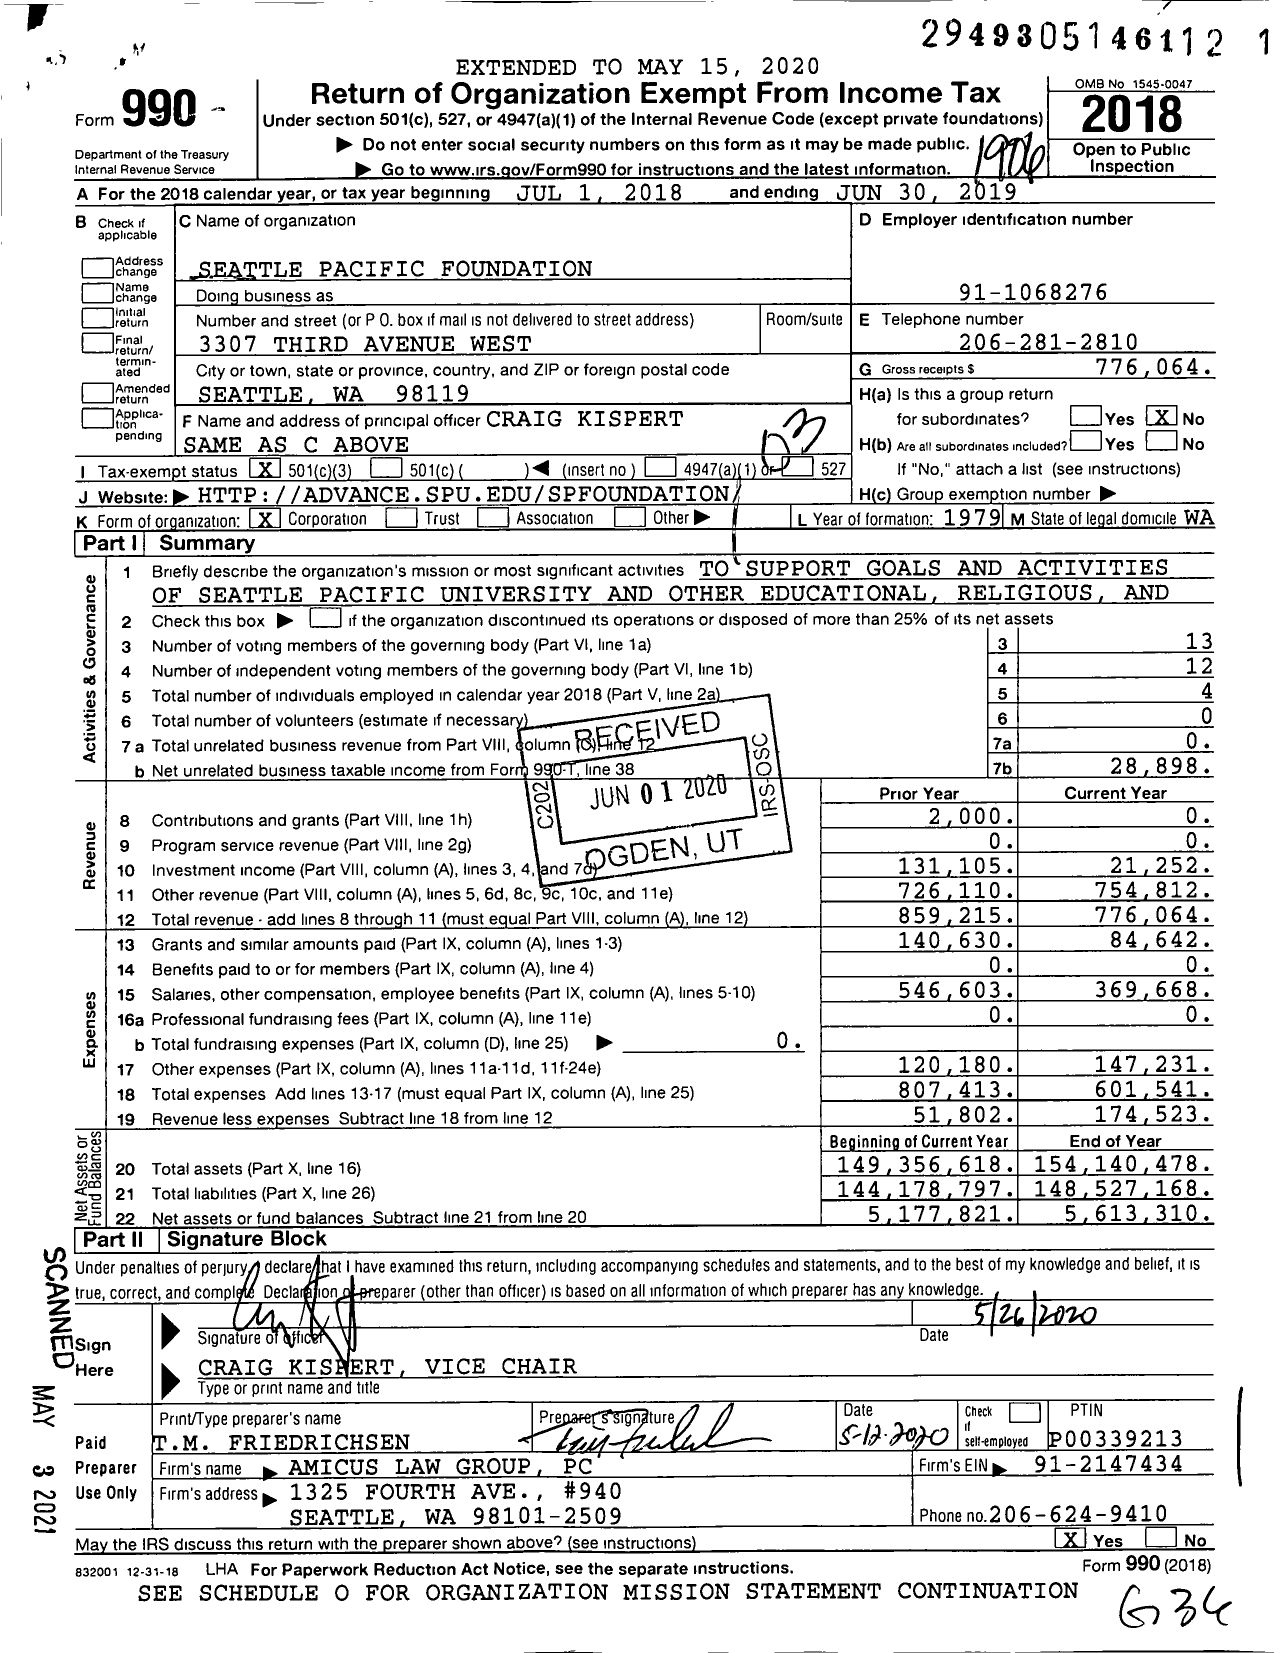 Image of first page of 2018 Form 990 for Seattle Pacific Foundation